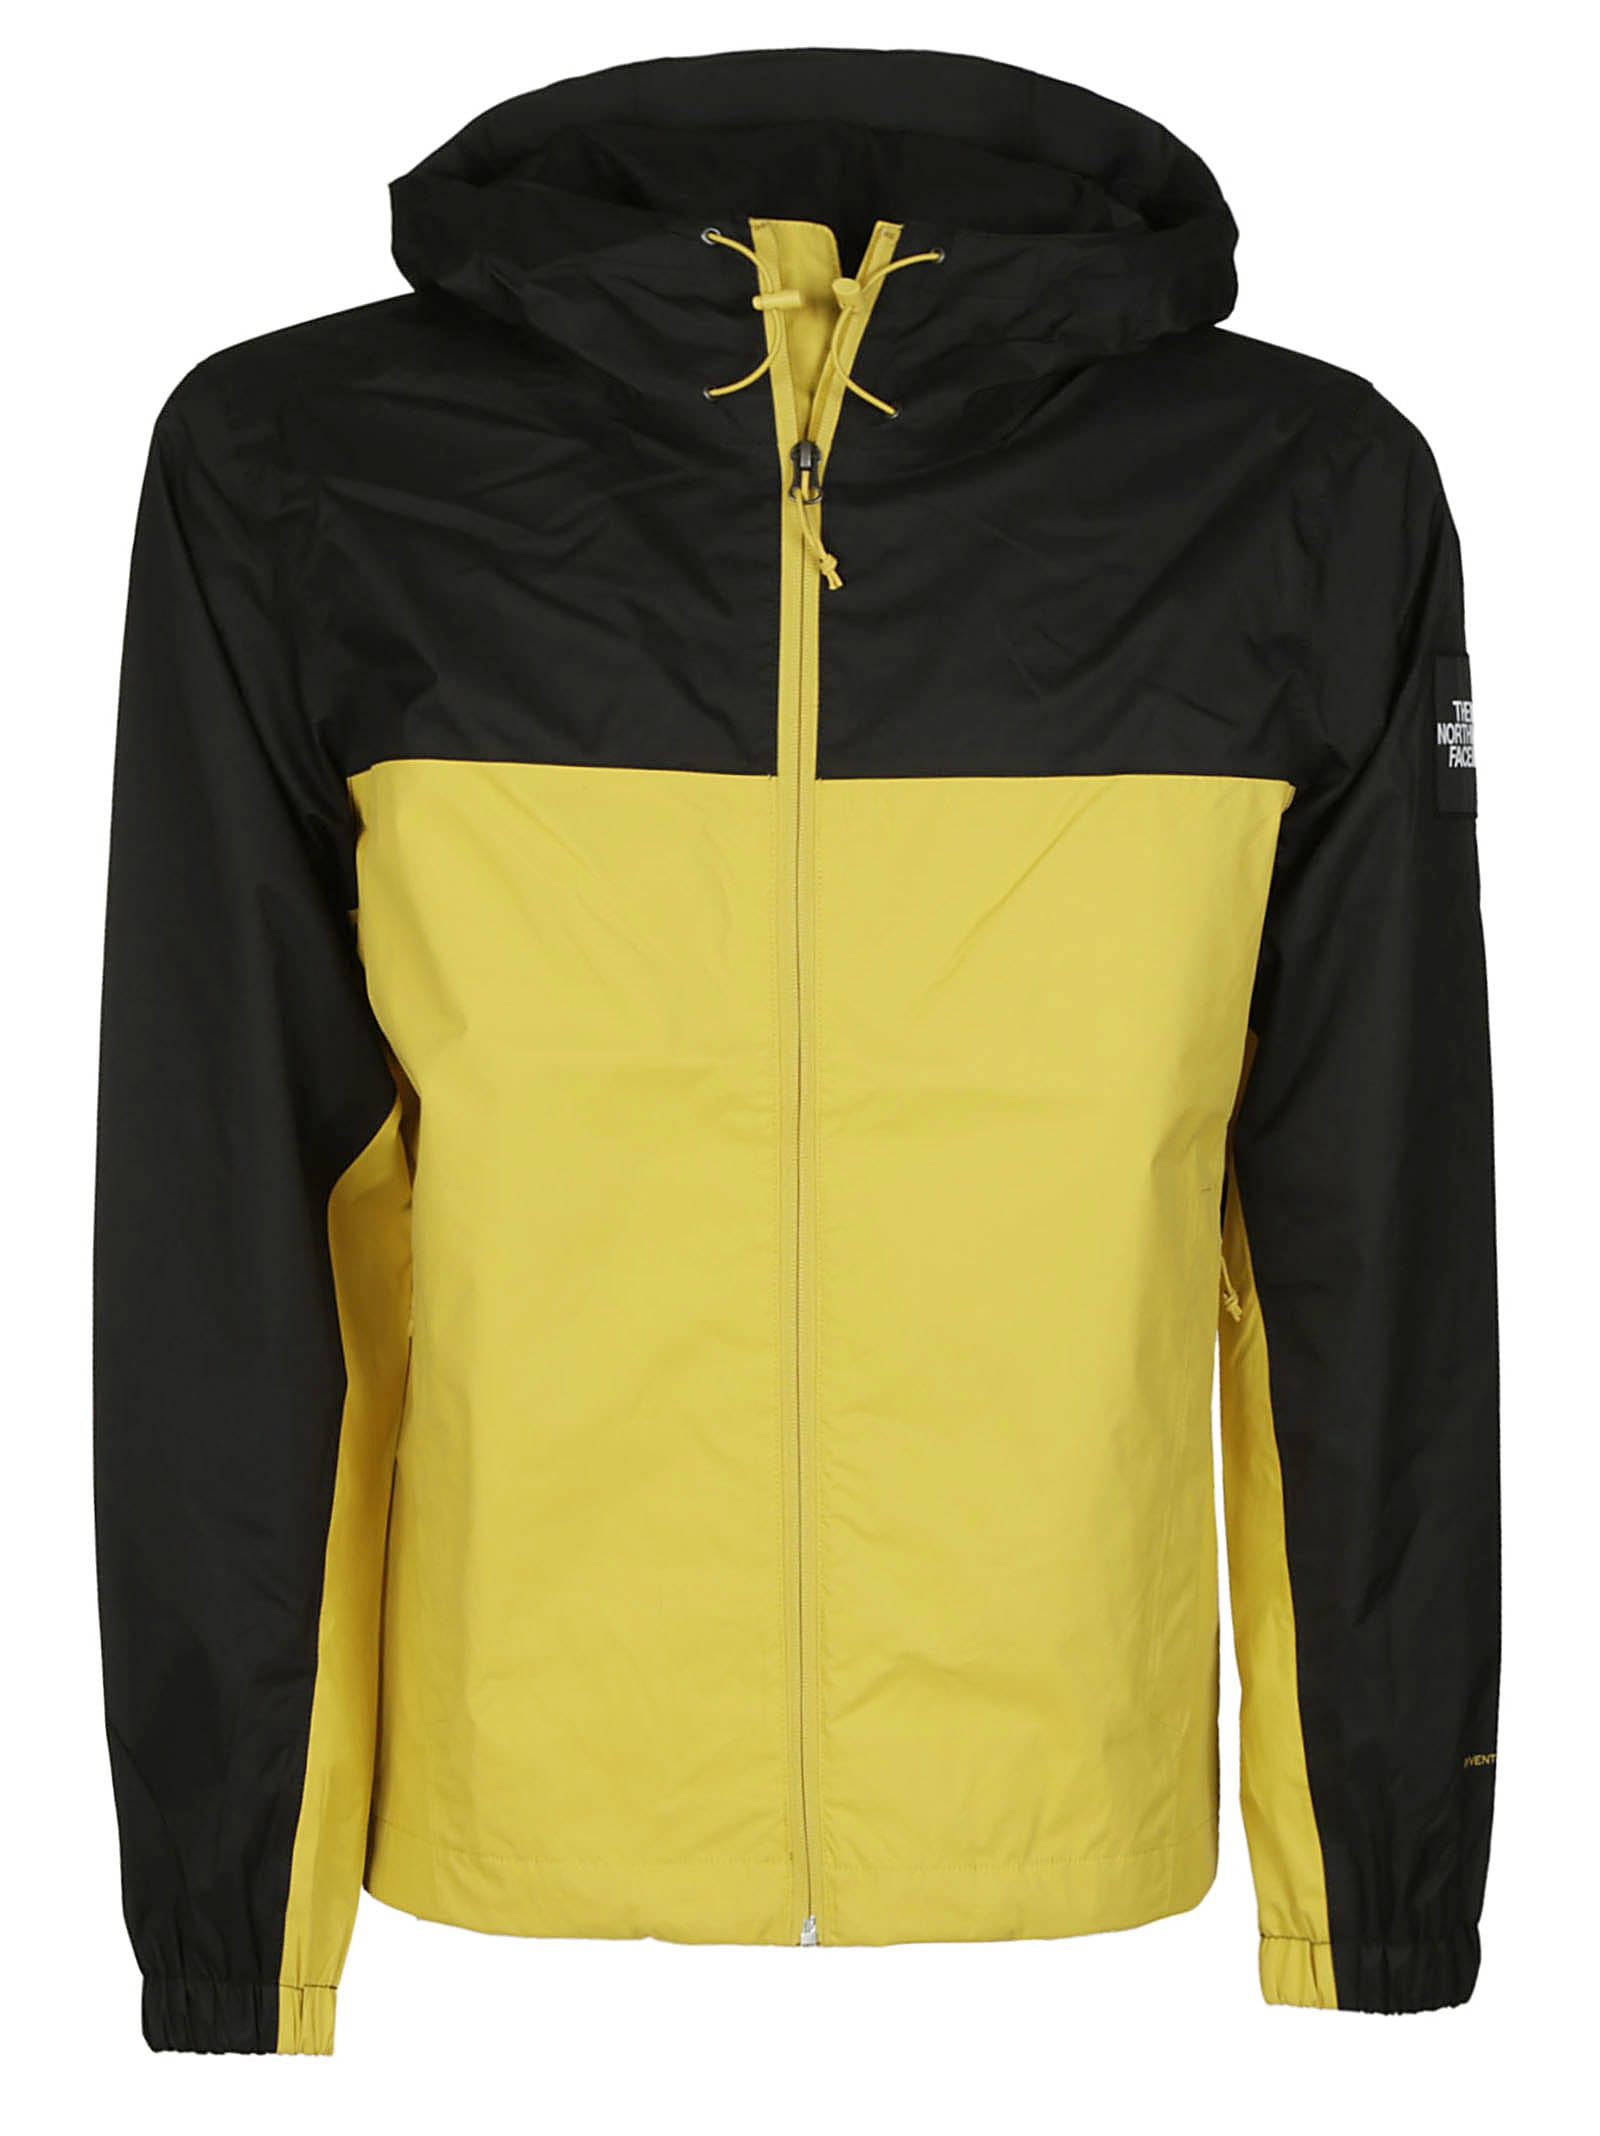 THE NORTH FACE MOUNTAIN JACKET,11292220